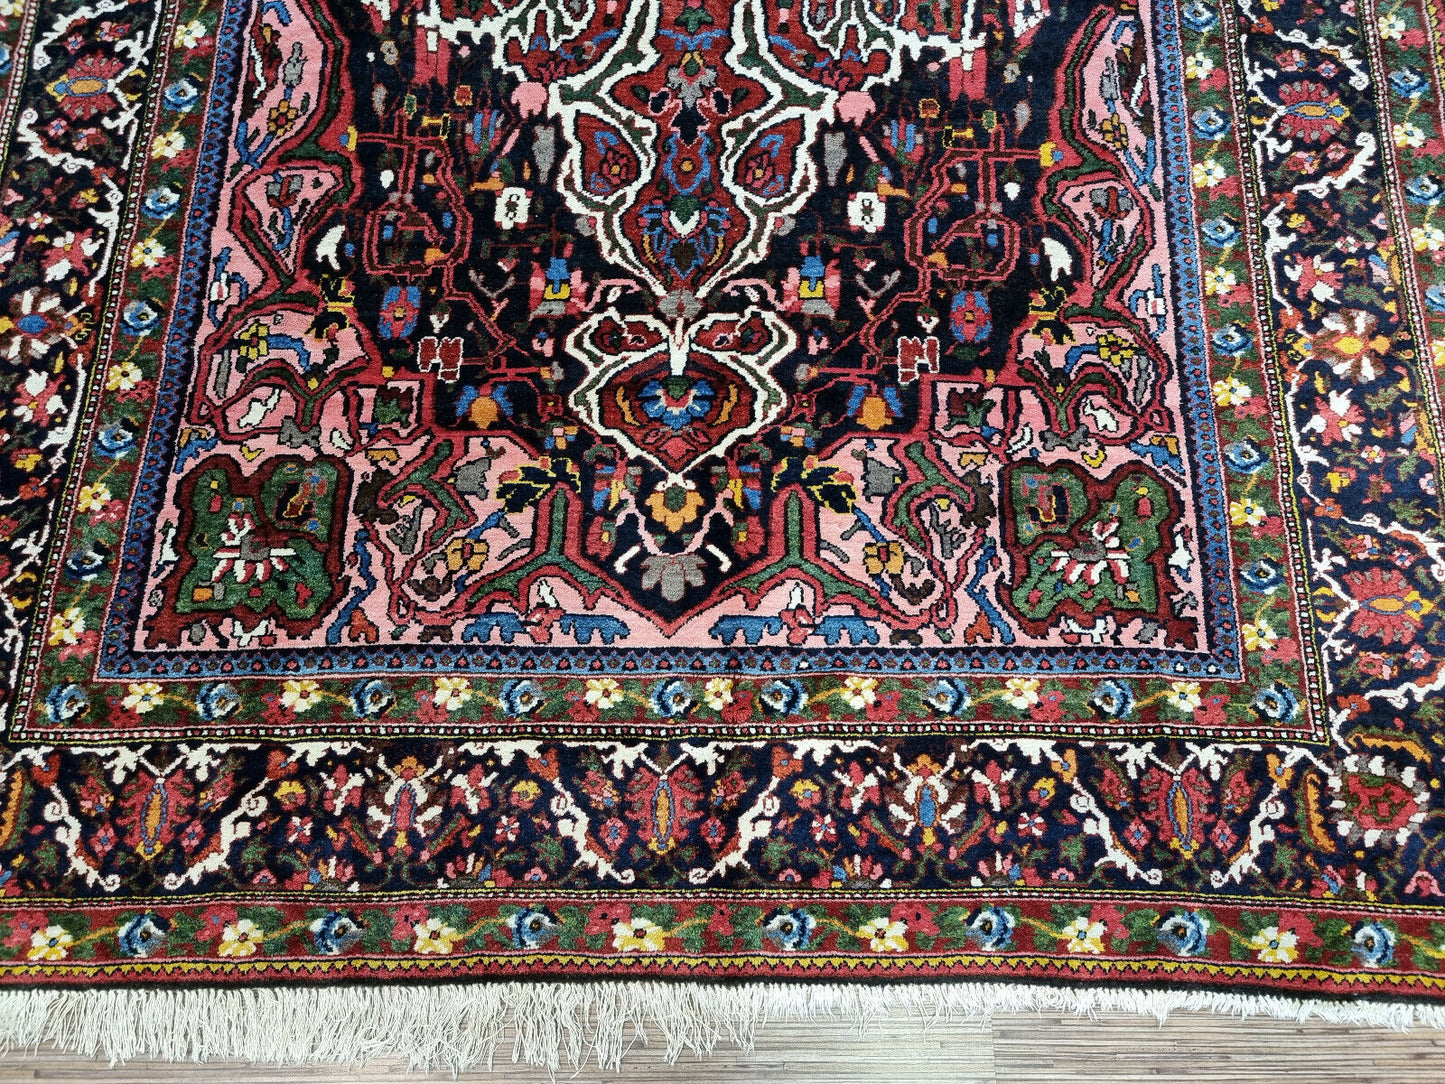 Close-up of rich tapestry of colors on Handmade Antique Persian Bakhtiari Rug - Detailed view showcasing the vibrant hues including deep reds, vibrant blues, lush greens, and subtle creams.